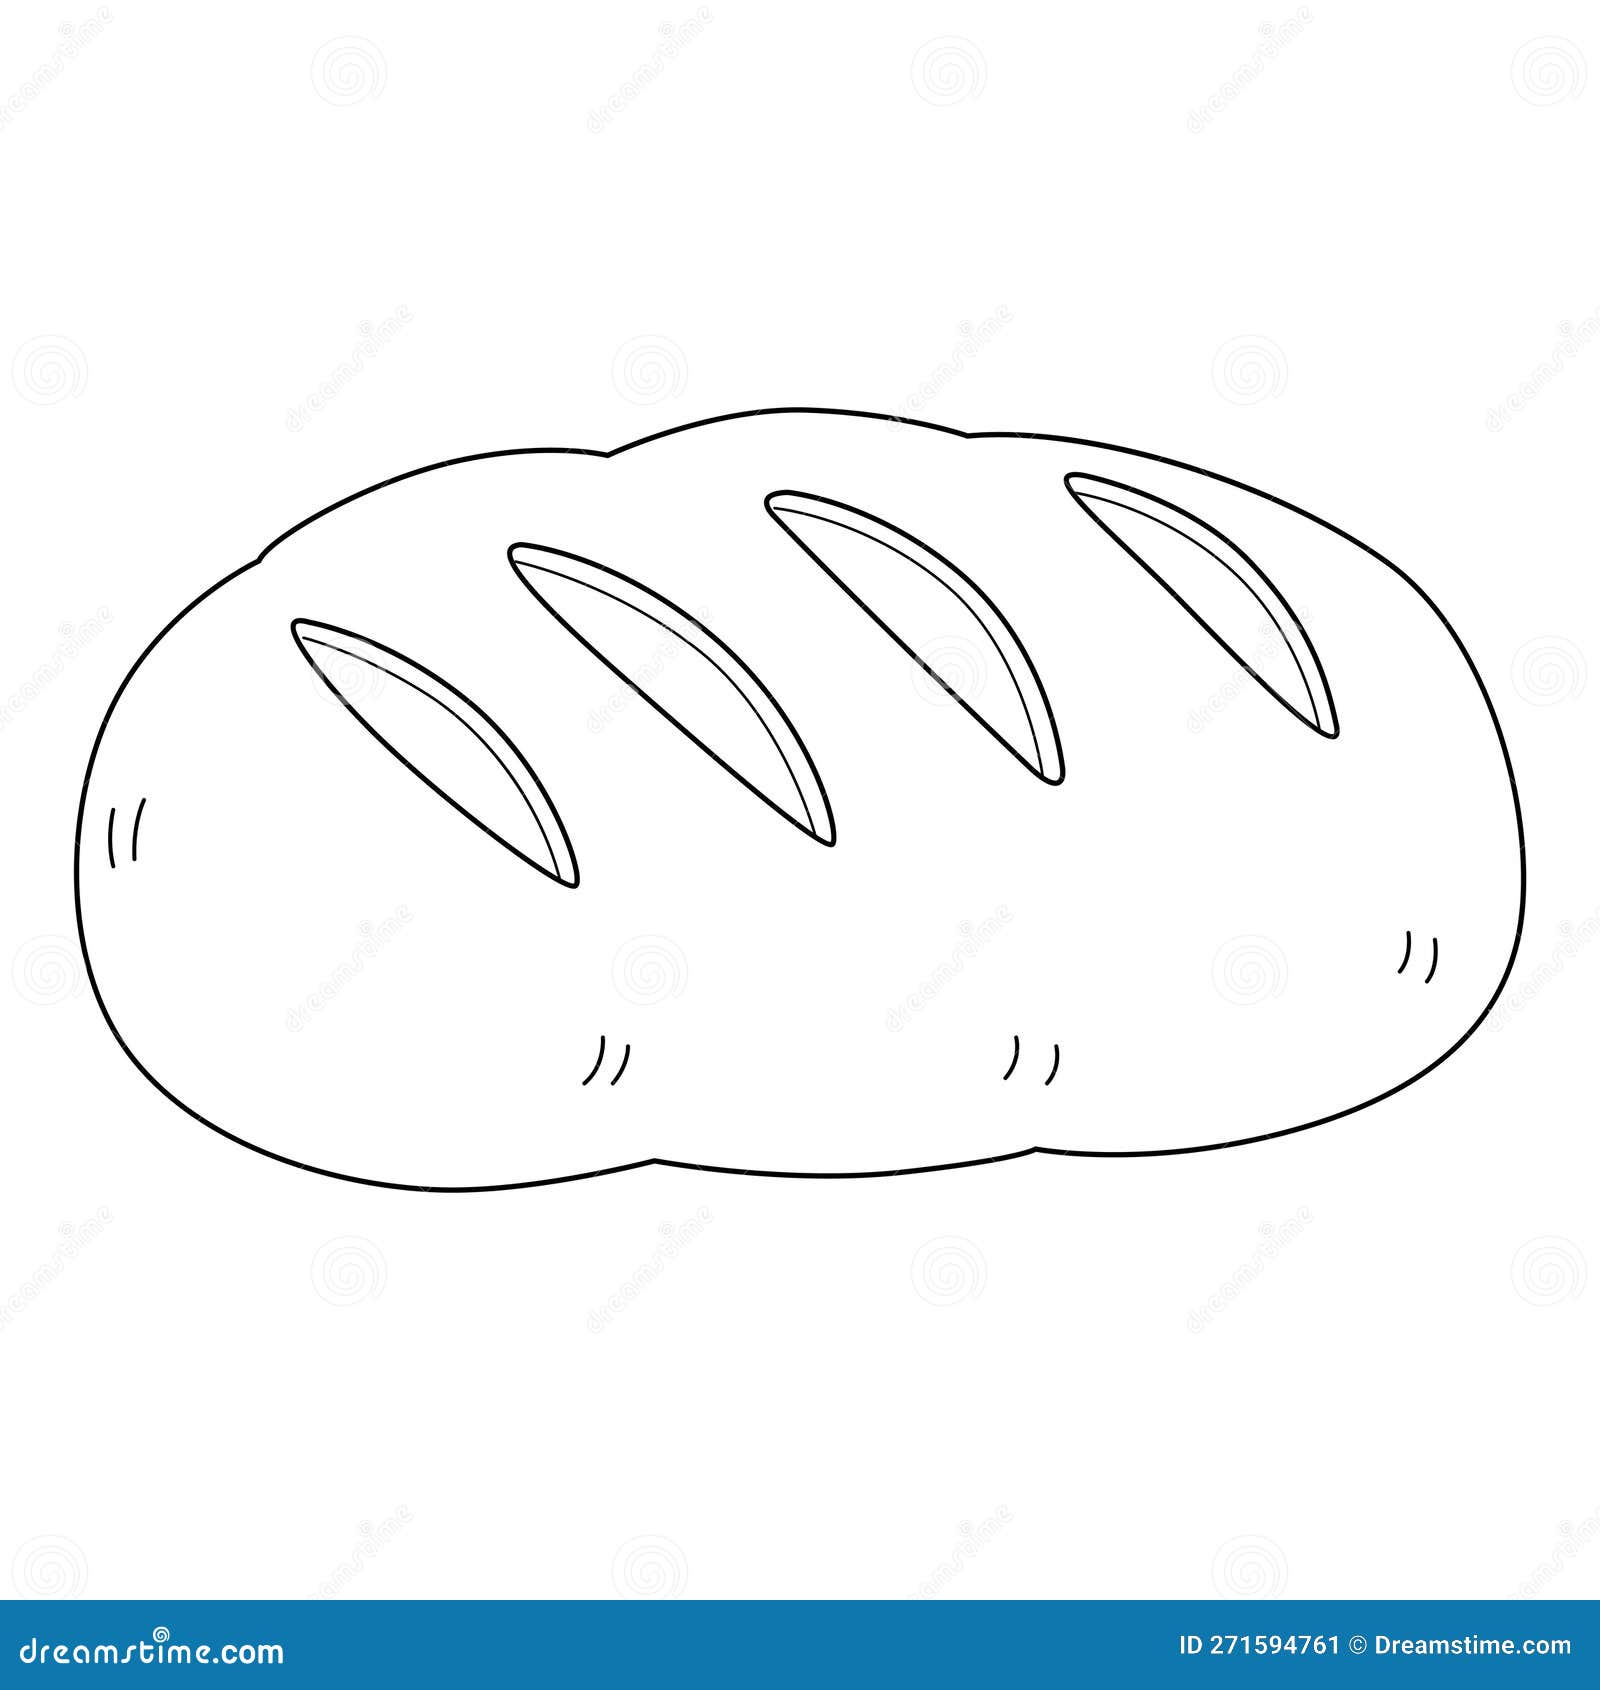 Loaf Bread Vector: Over 63,793 Royalty-Free Licensable Stock Illustrations  & Drawings | Shutterstock